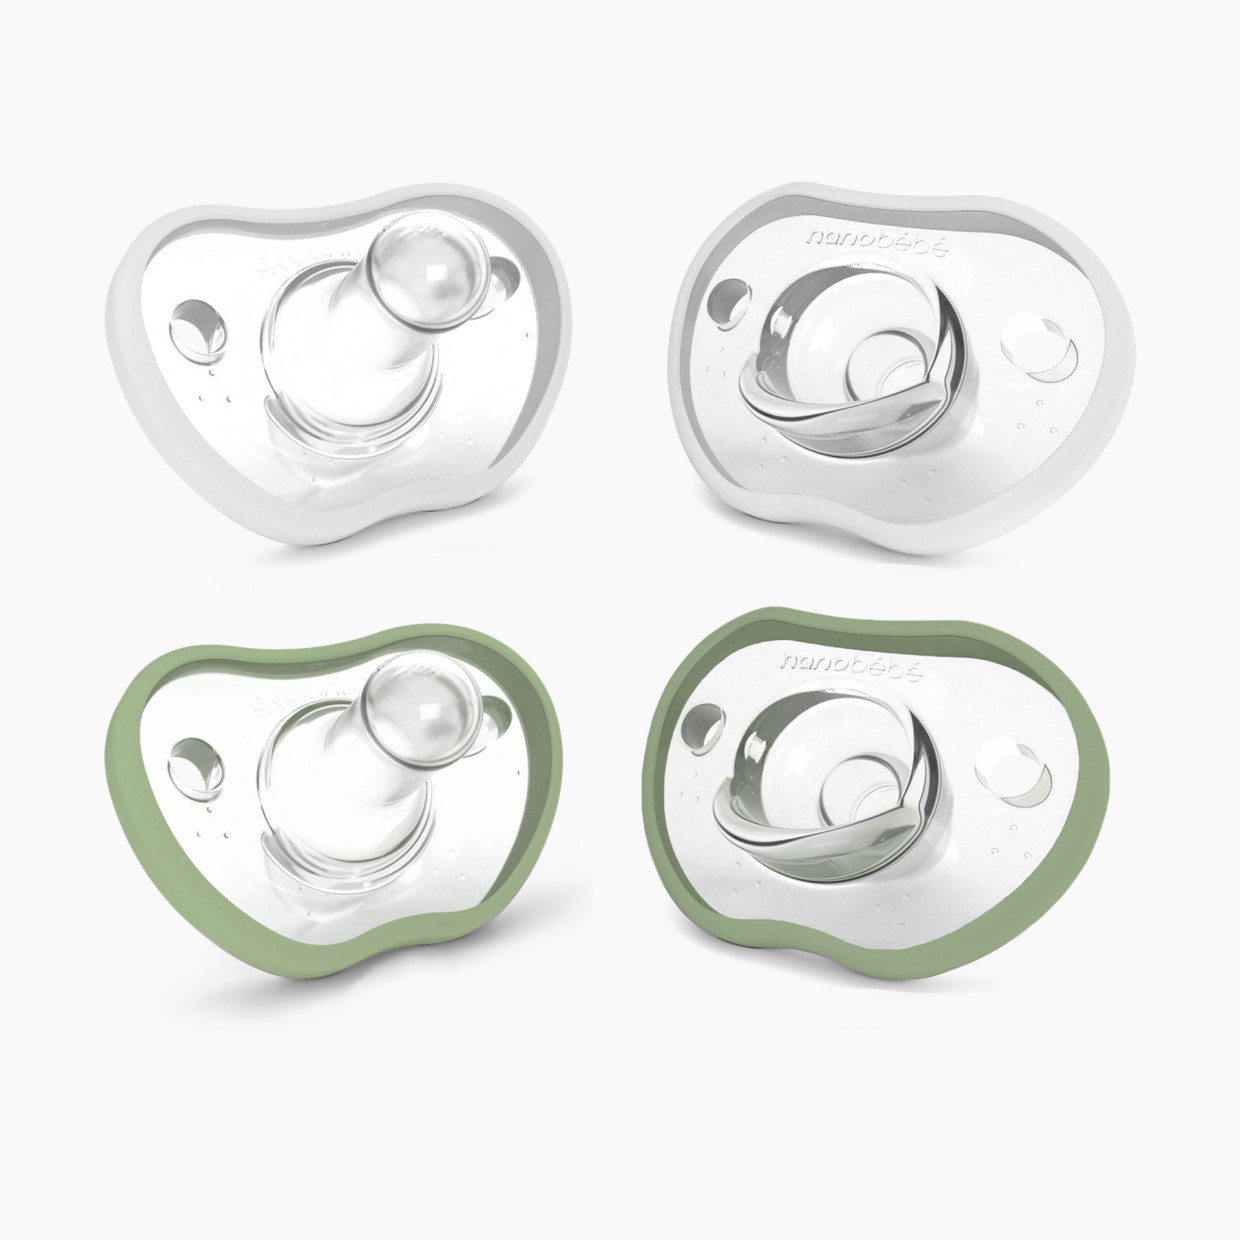 Nanobebe Flexy Pacifier (4 Pack) - Sage And White, 0-3 Months, 4.